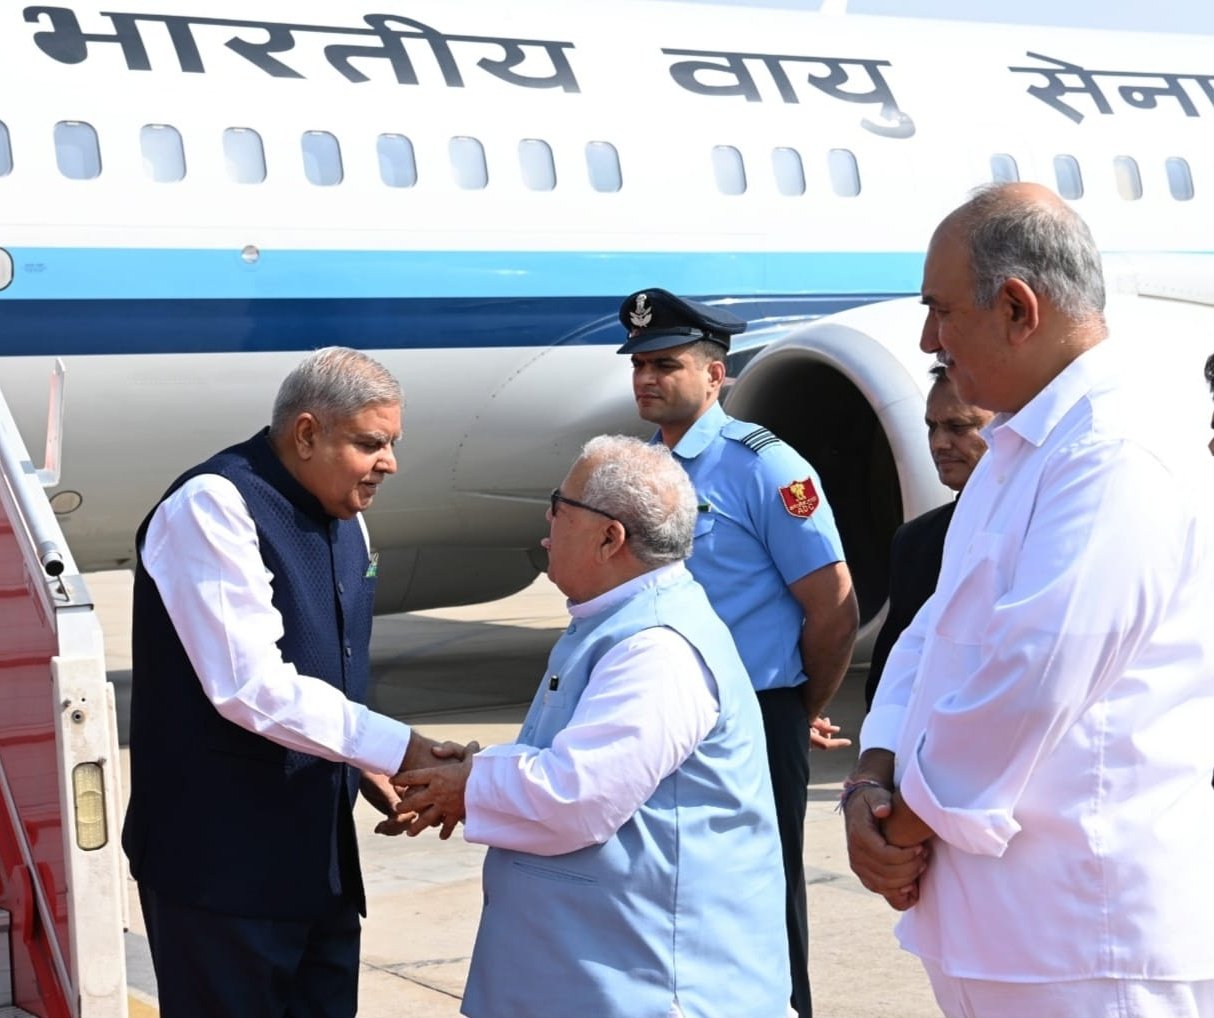 The Vice-President, Shri Jagdeep Dhankhar being welcomed by Shri Kalraj Mishra, Governor of Rajasthan and other dignitaries on his arrival in Jaipur, Rajasthan on October 23, 2023.